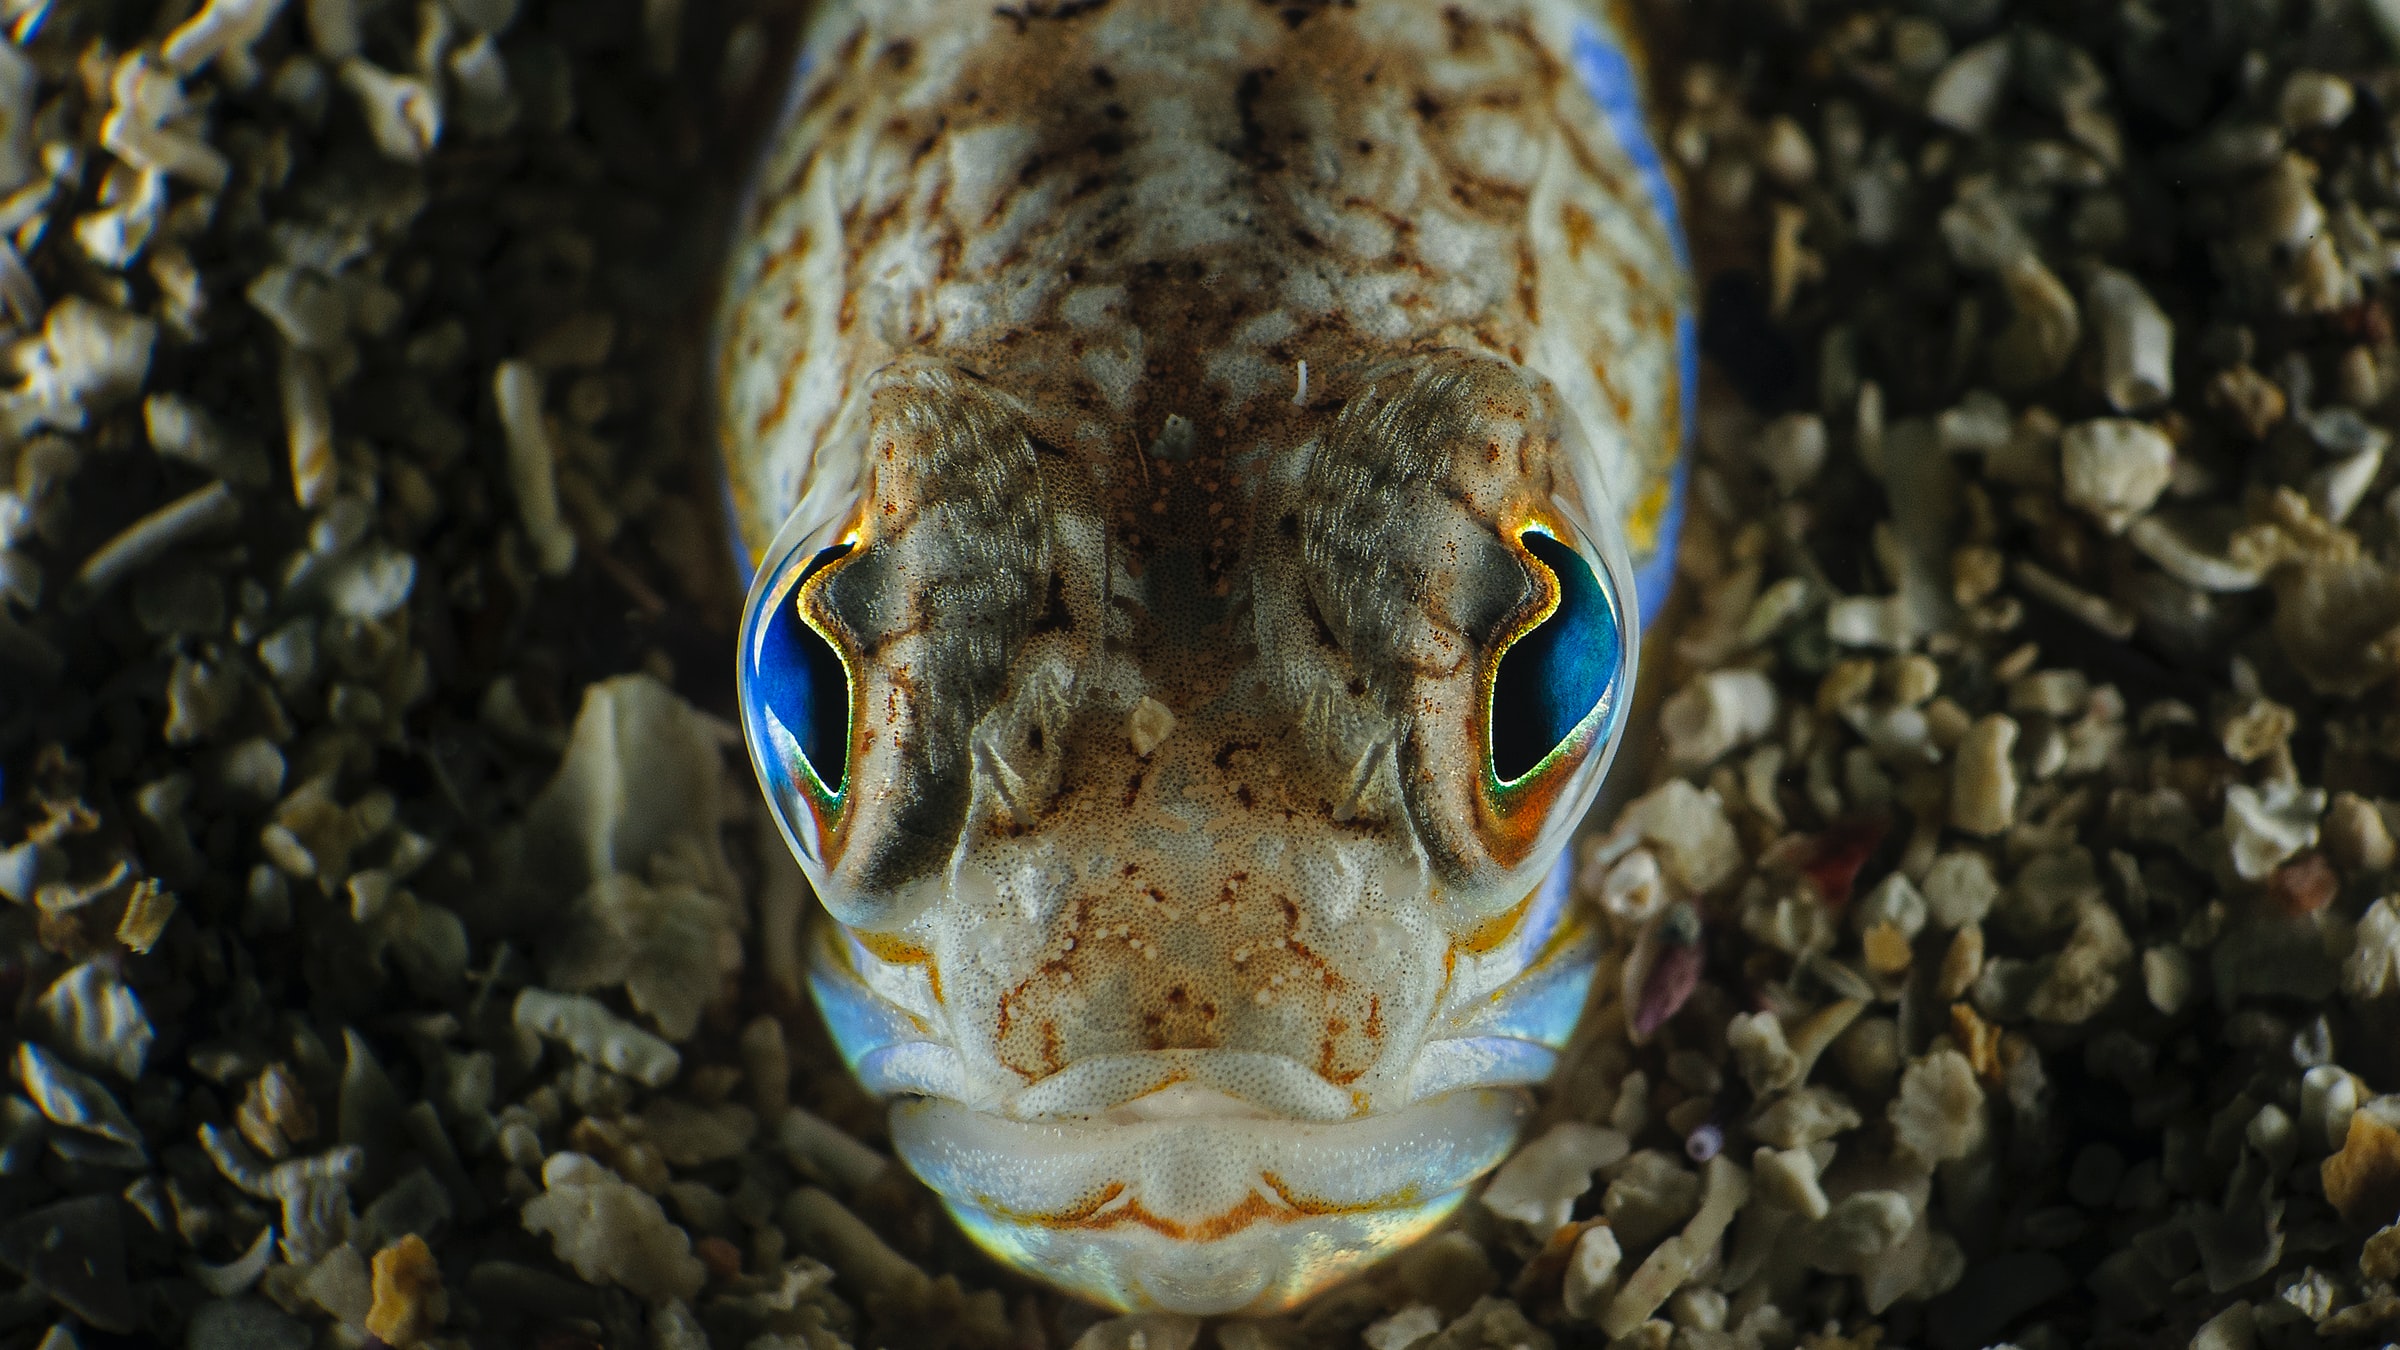 A fish looking up